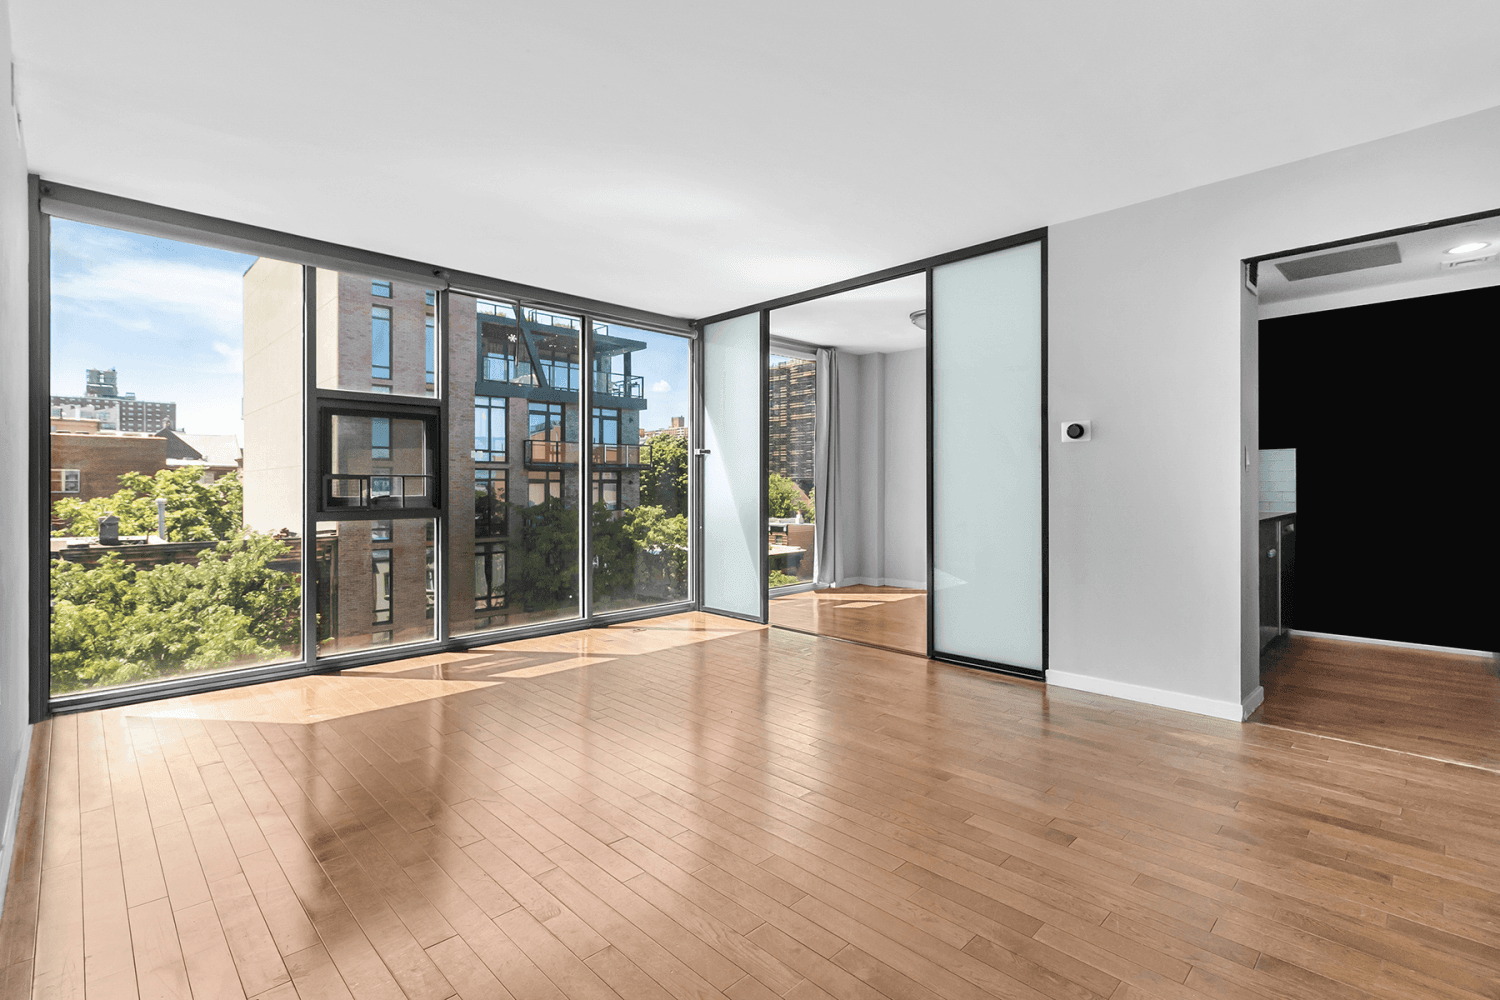 At the intersection of Brooklyn's trendiest neighborhoods, this sun soaked 1 bedroom home office, 1 bathroom condo is the perfect blend of chic and modern living.